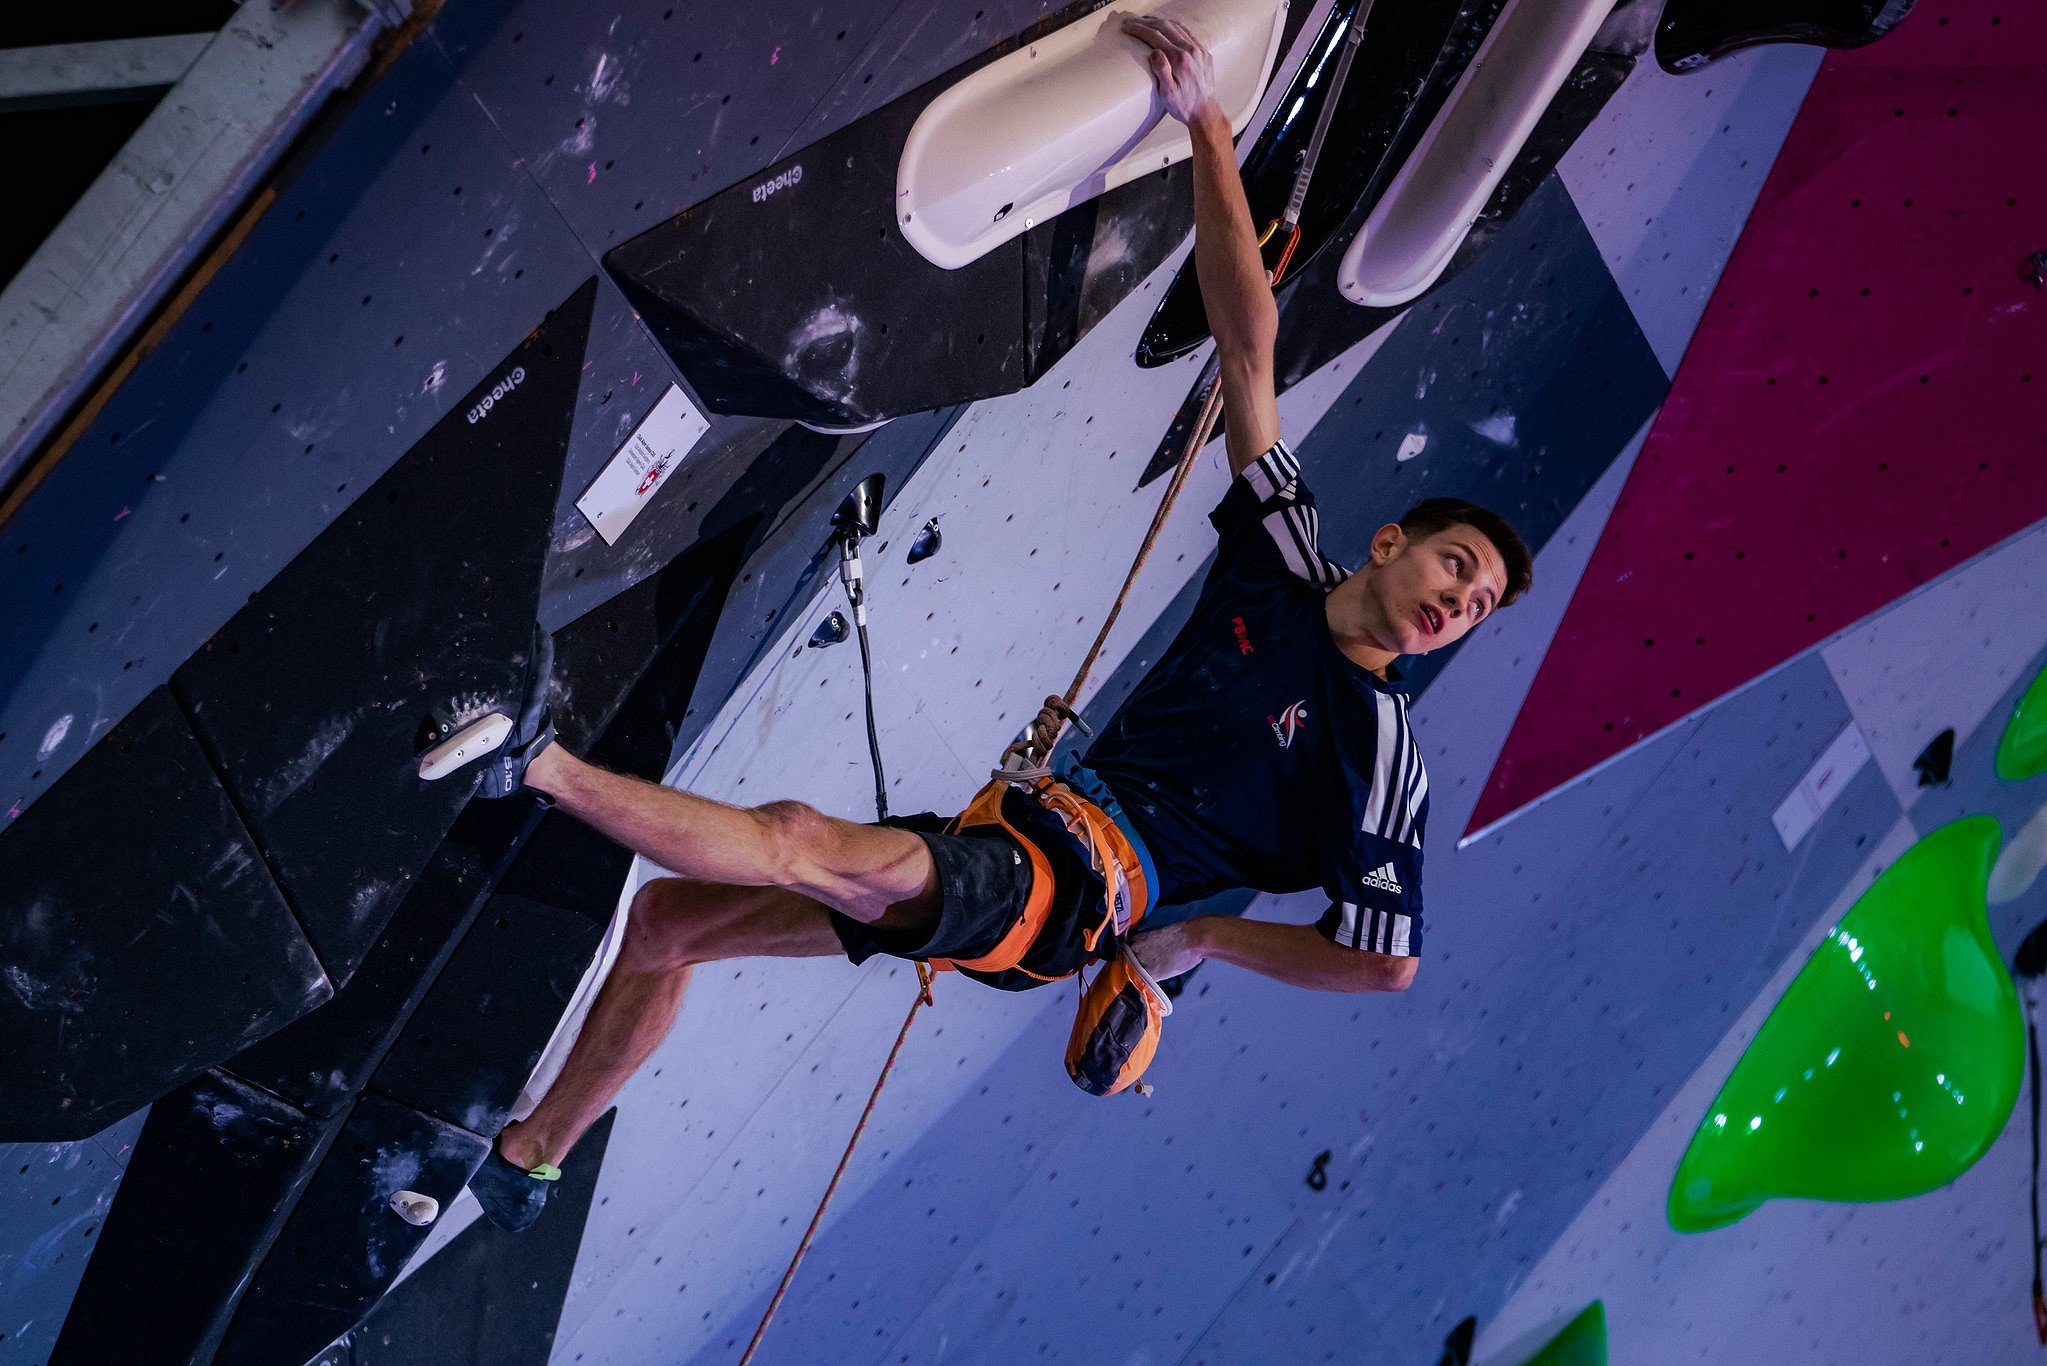 Toby Roberts (GBR) looking relaxed in the final. He finished 4th.  © Lena Drapella/IFSC